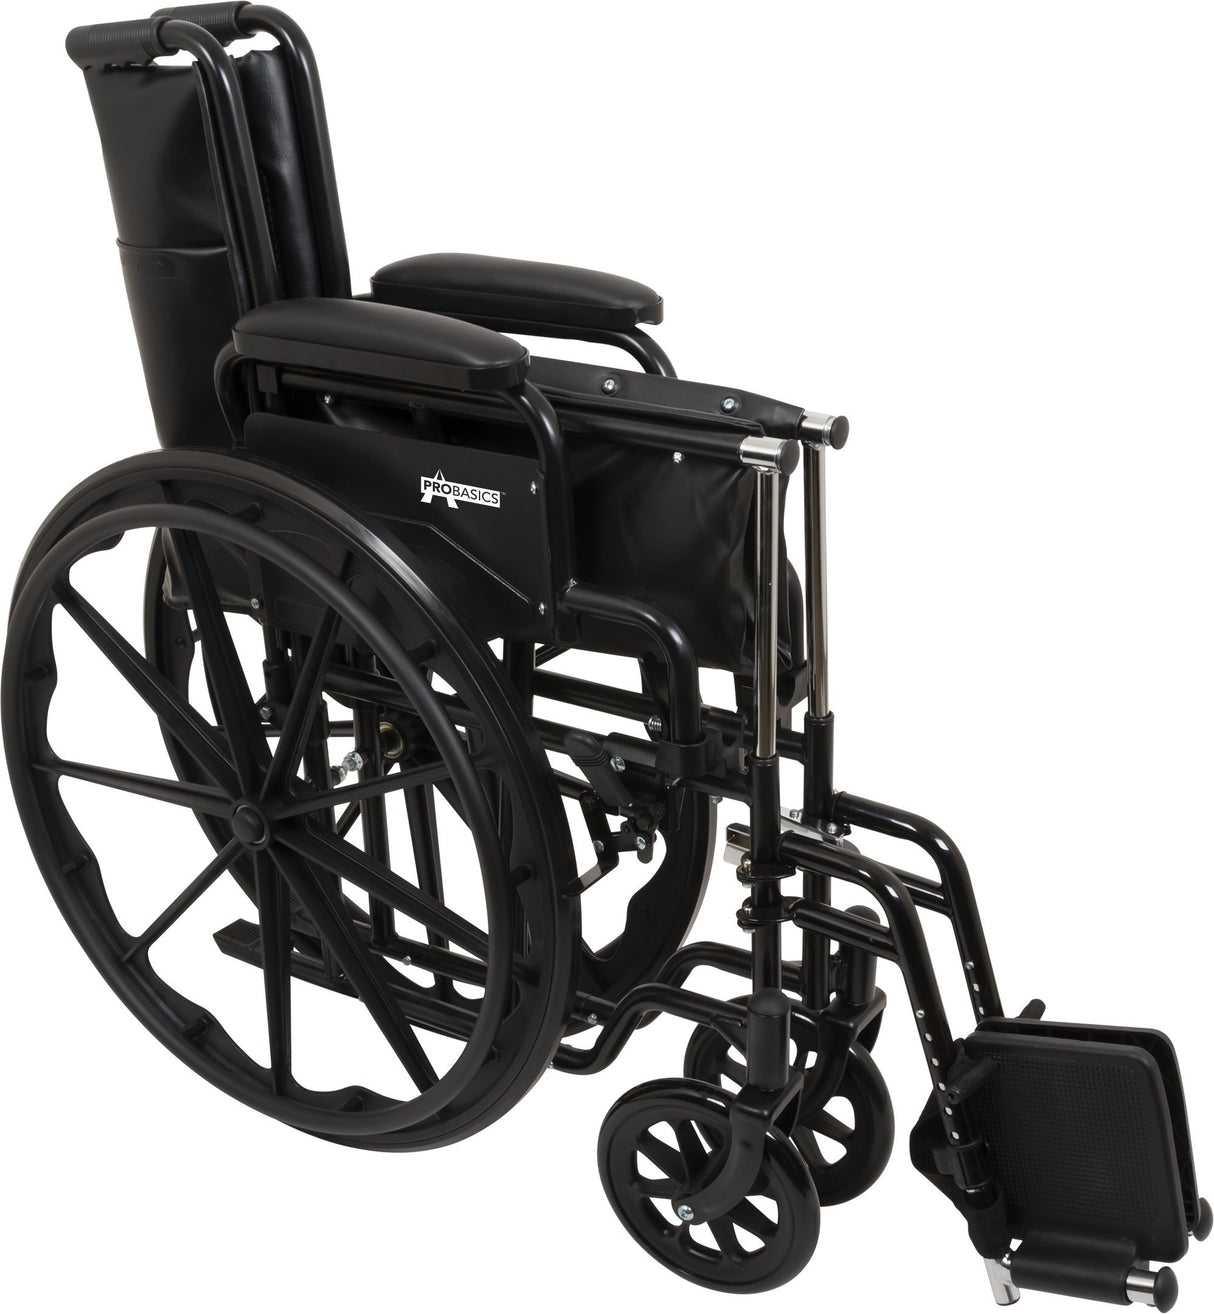 Image of ProBasics K1 Lightweight Wheelchair with 16" x 16" Seat, Flip-Back Desk Arms, Swing-Away Footrests